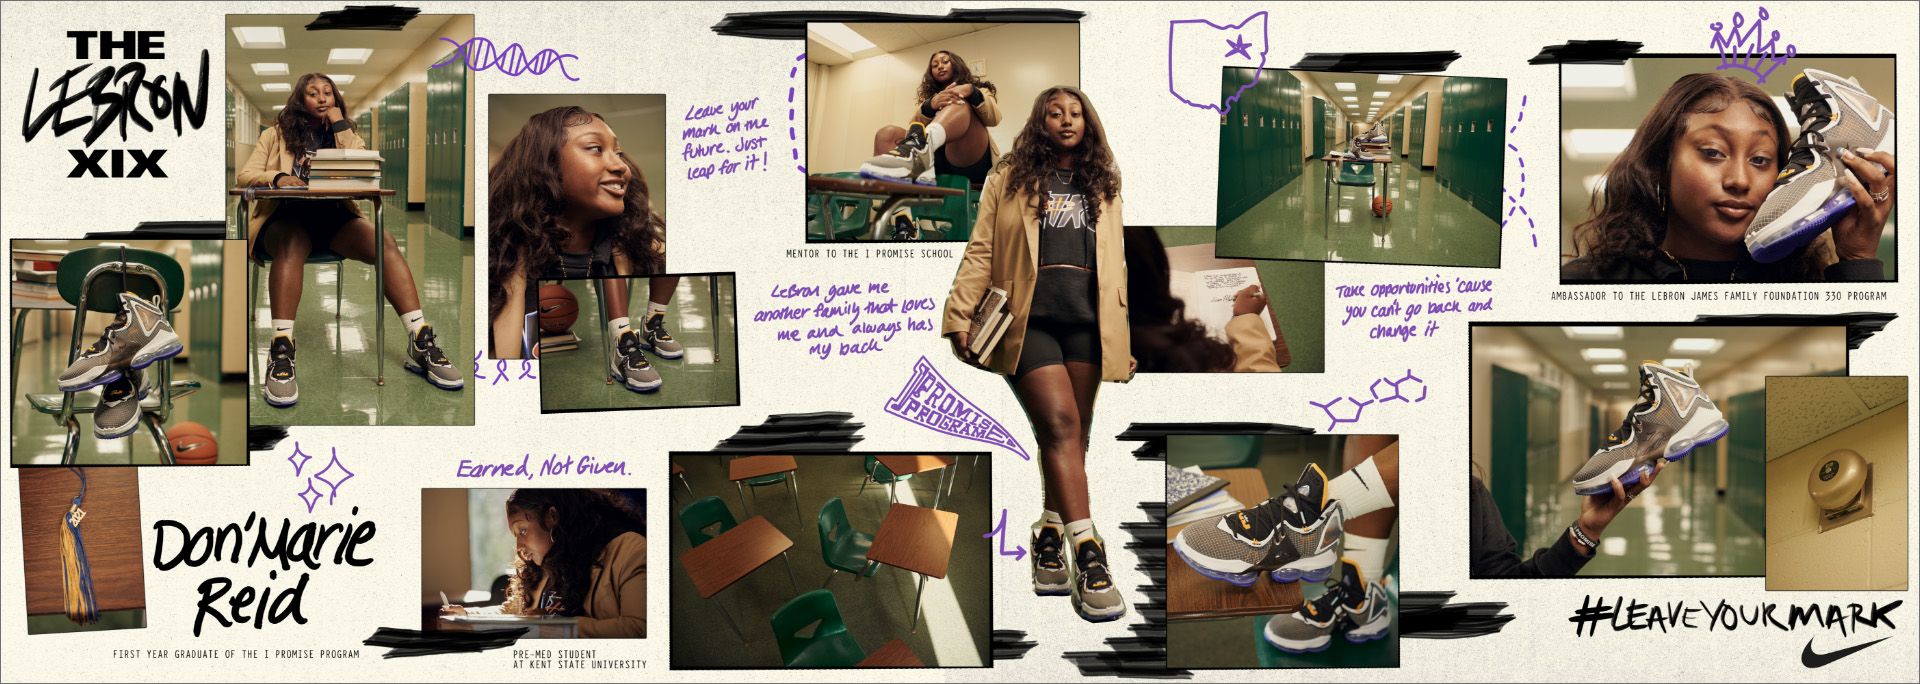 The Lebron XIX Don Marie Reid, first year graduate of the I Promise Program, collage of her in school and notes on how Lebron has impacted her life